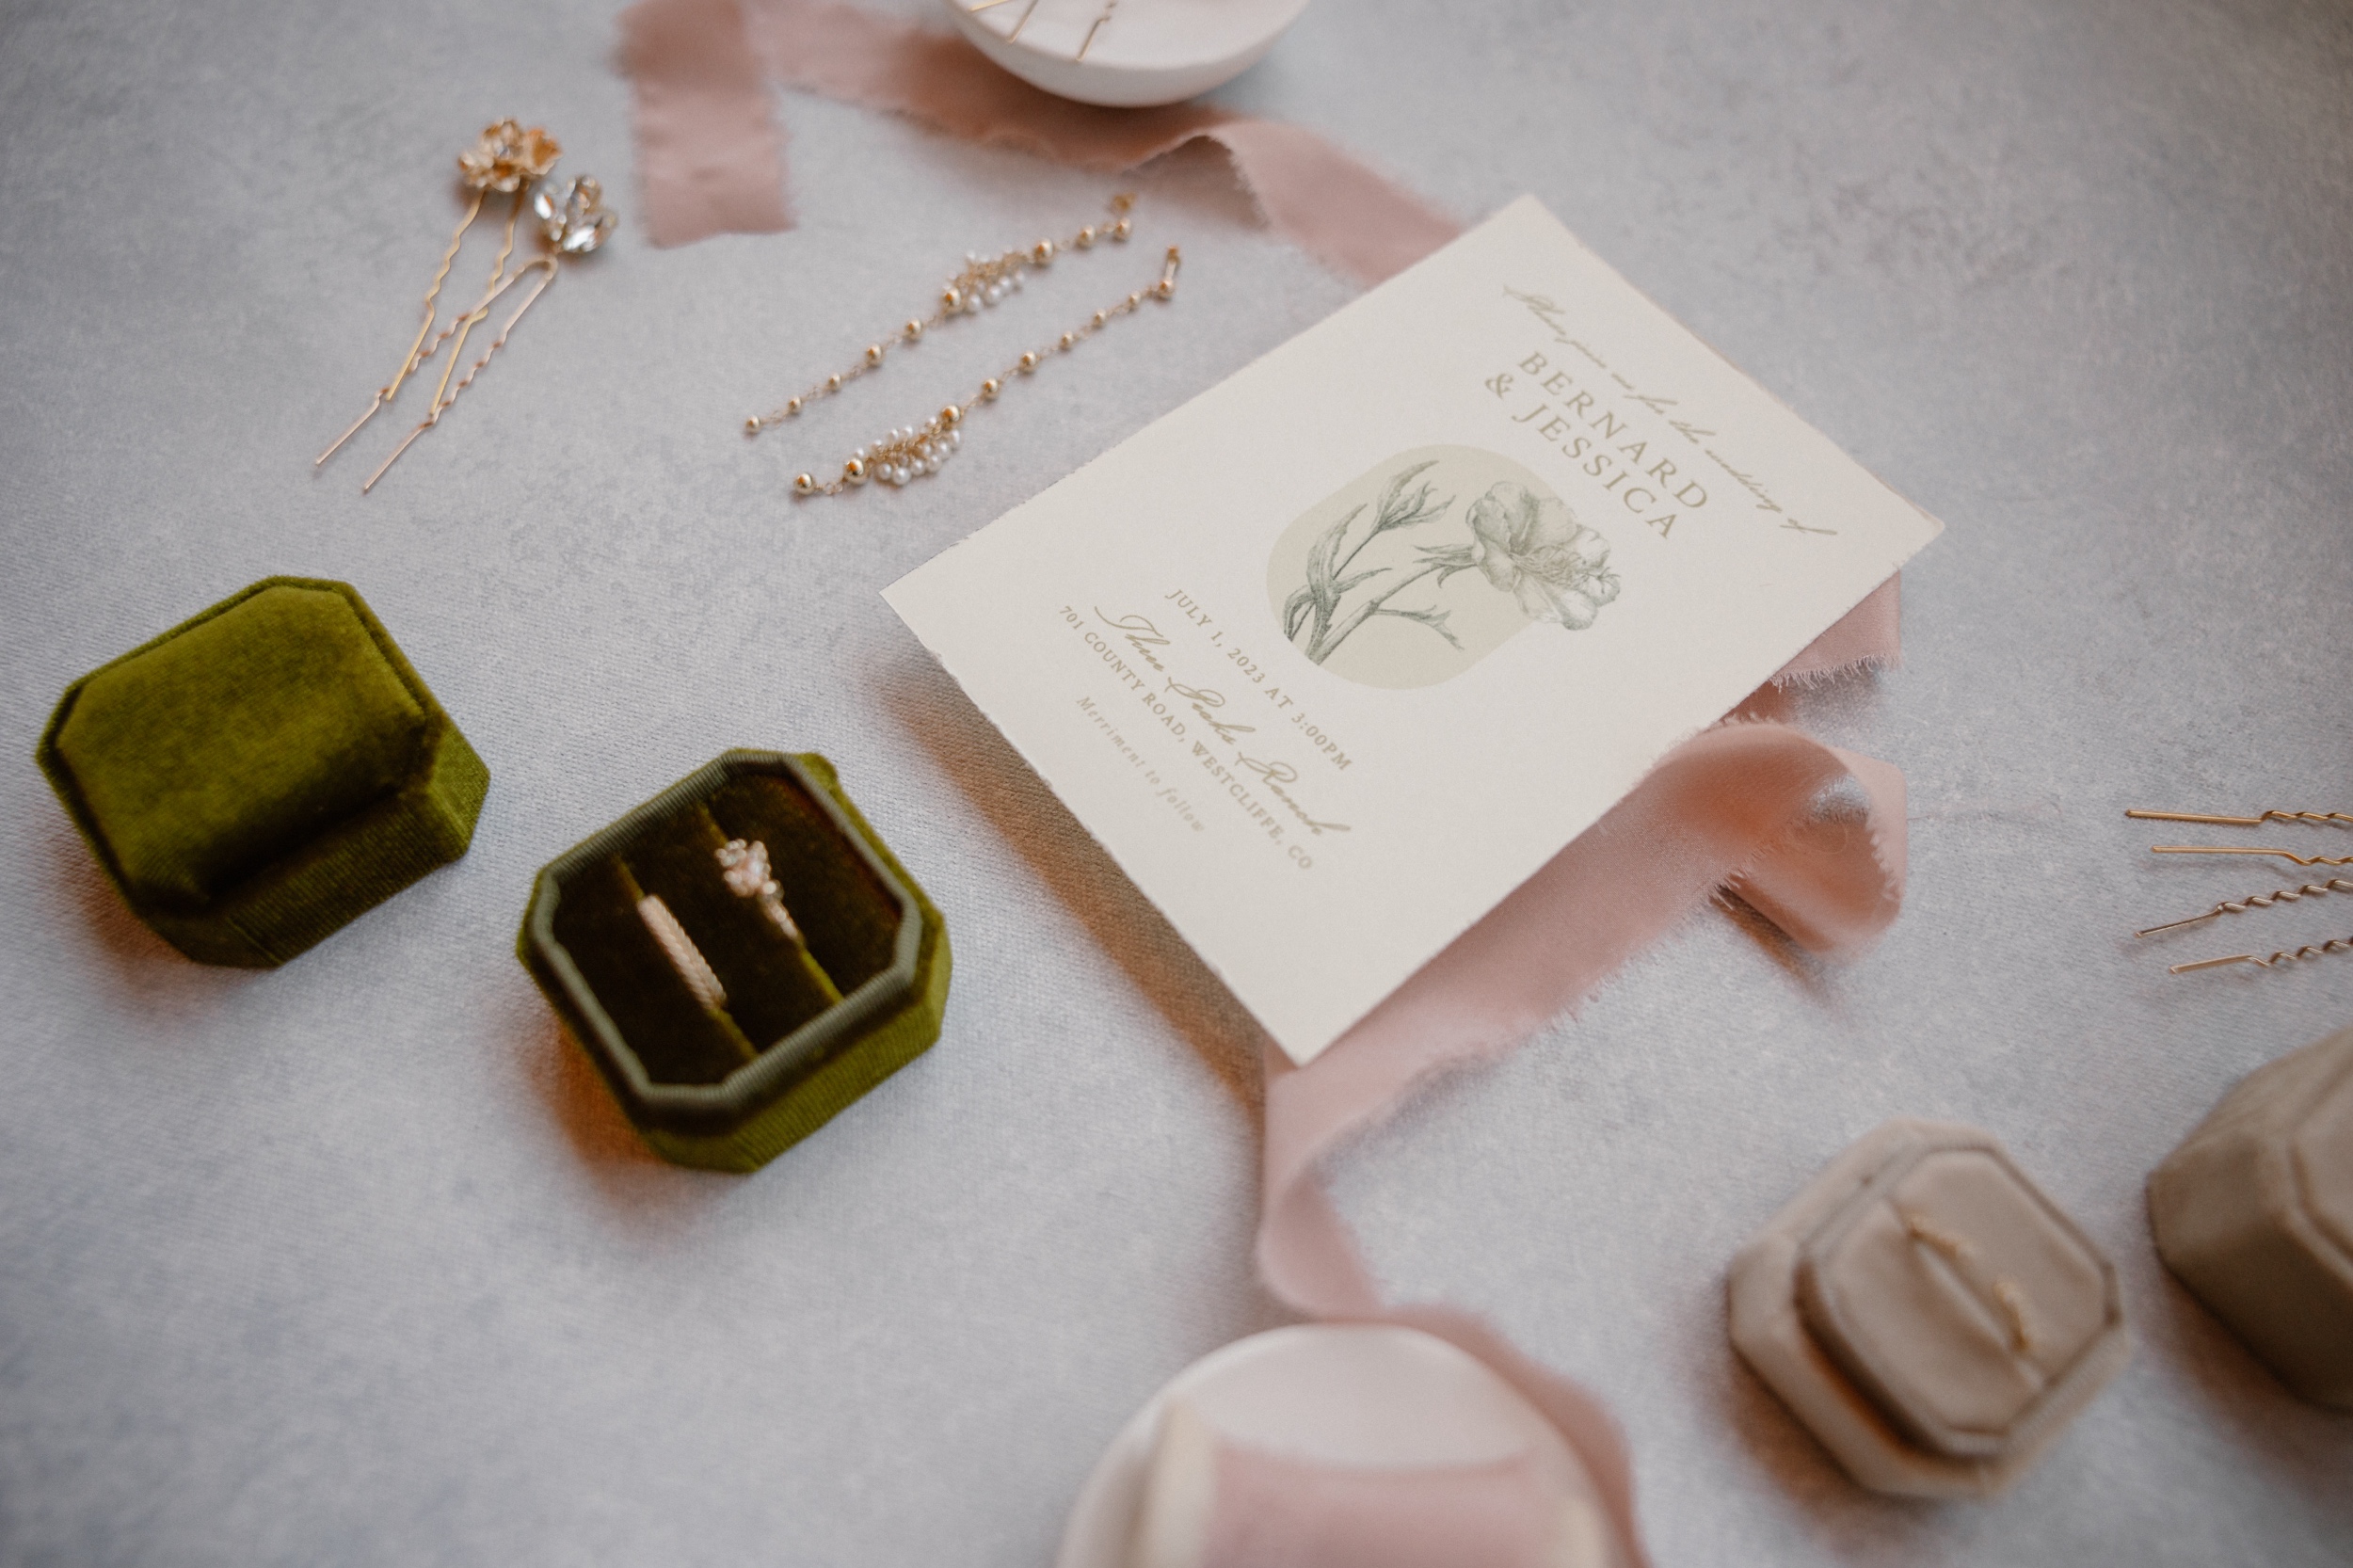 A photo of a couple's wedding details, including their wedding invitation, wedding rings, and accessories. Photo by Ashley Joyce.